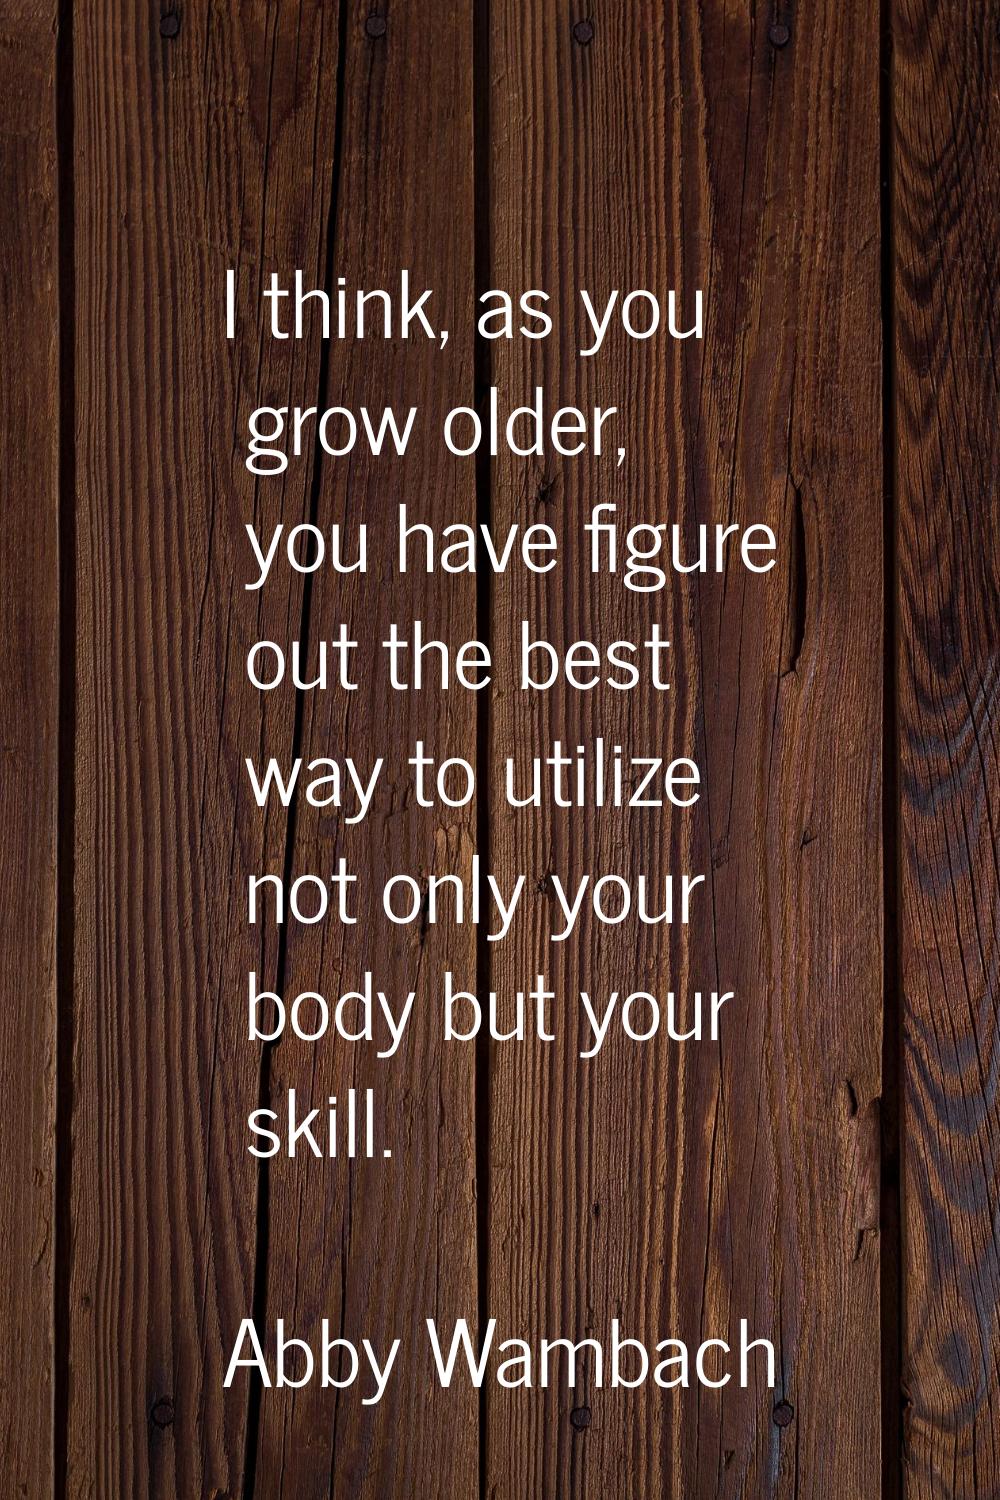 I think, as you grow older, you have figure out the best way to utilize not only your body but your